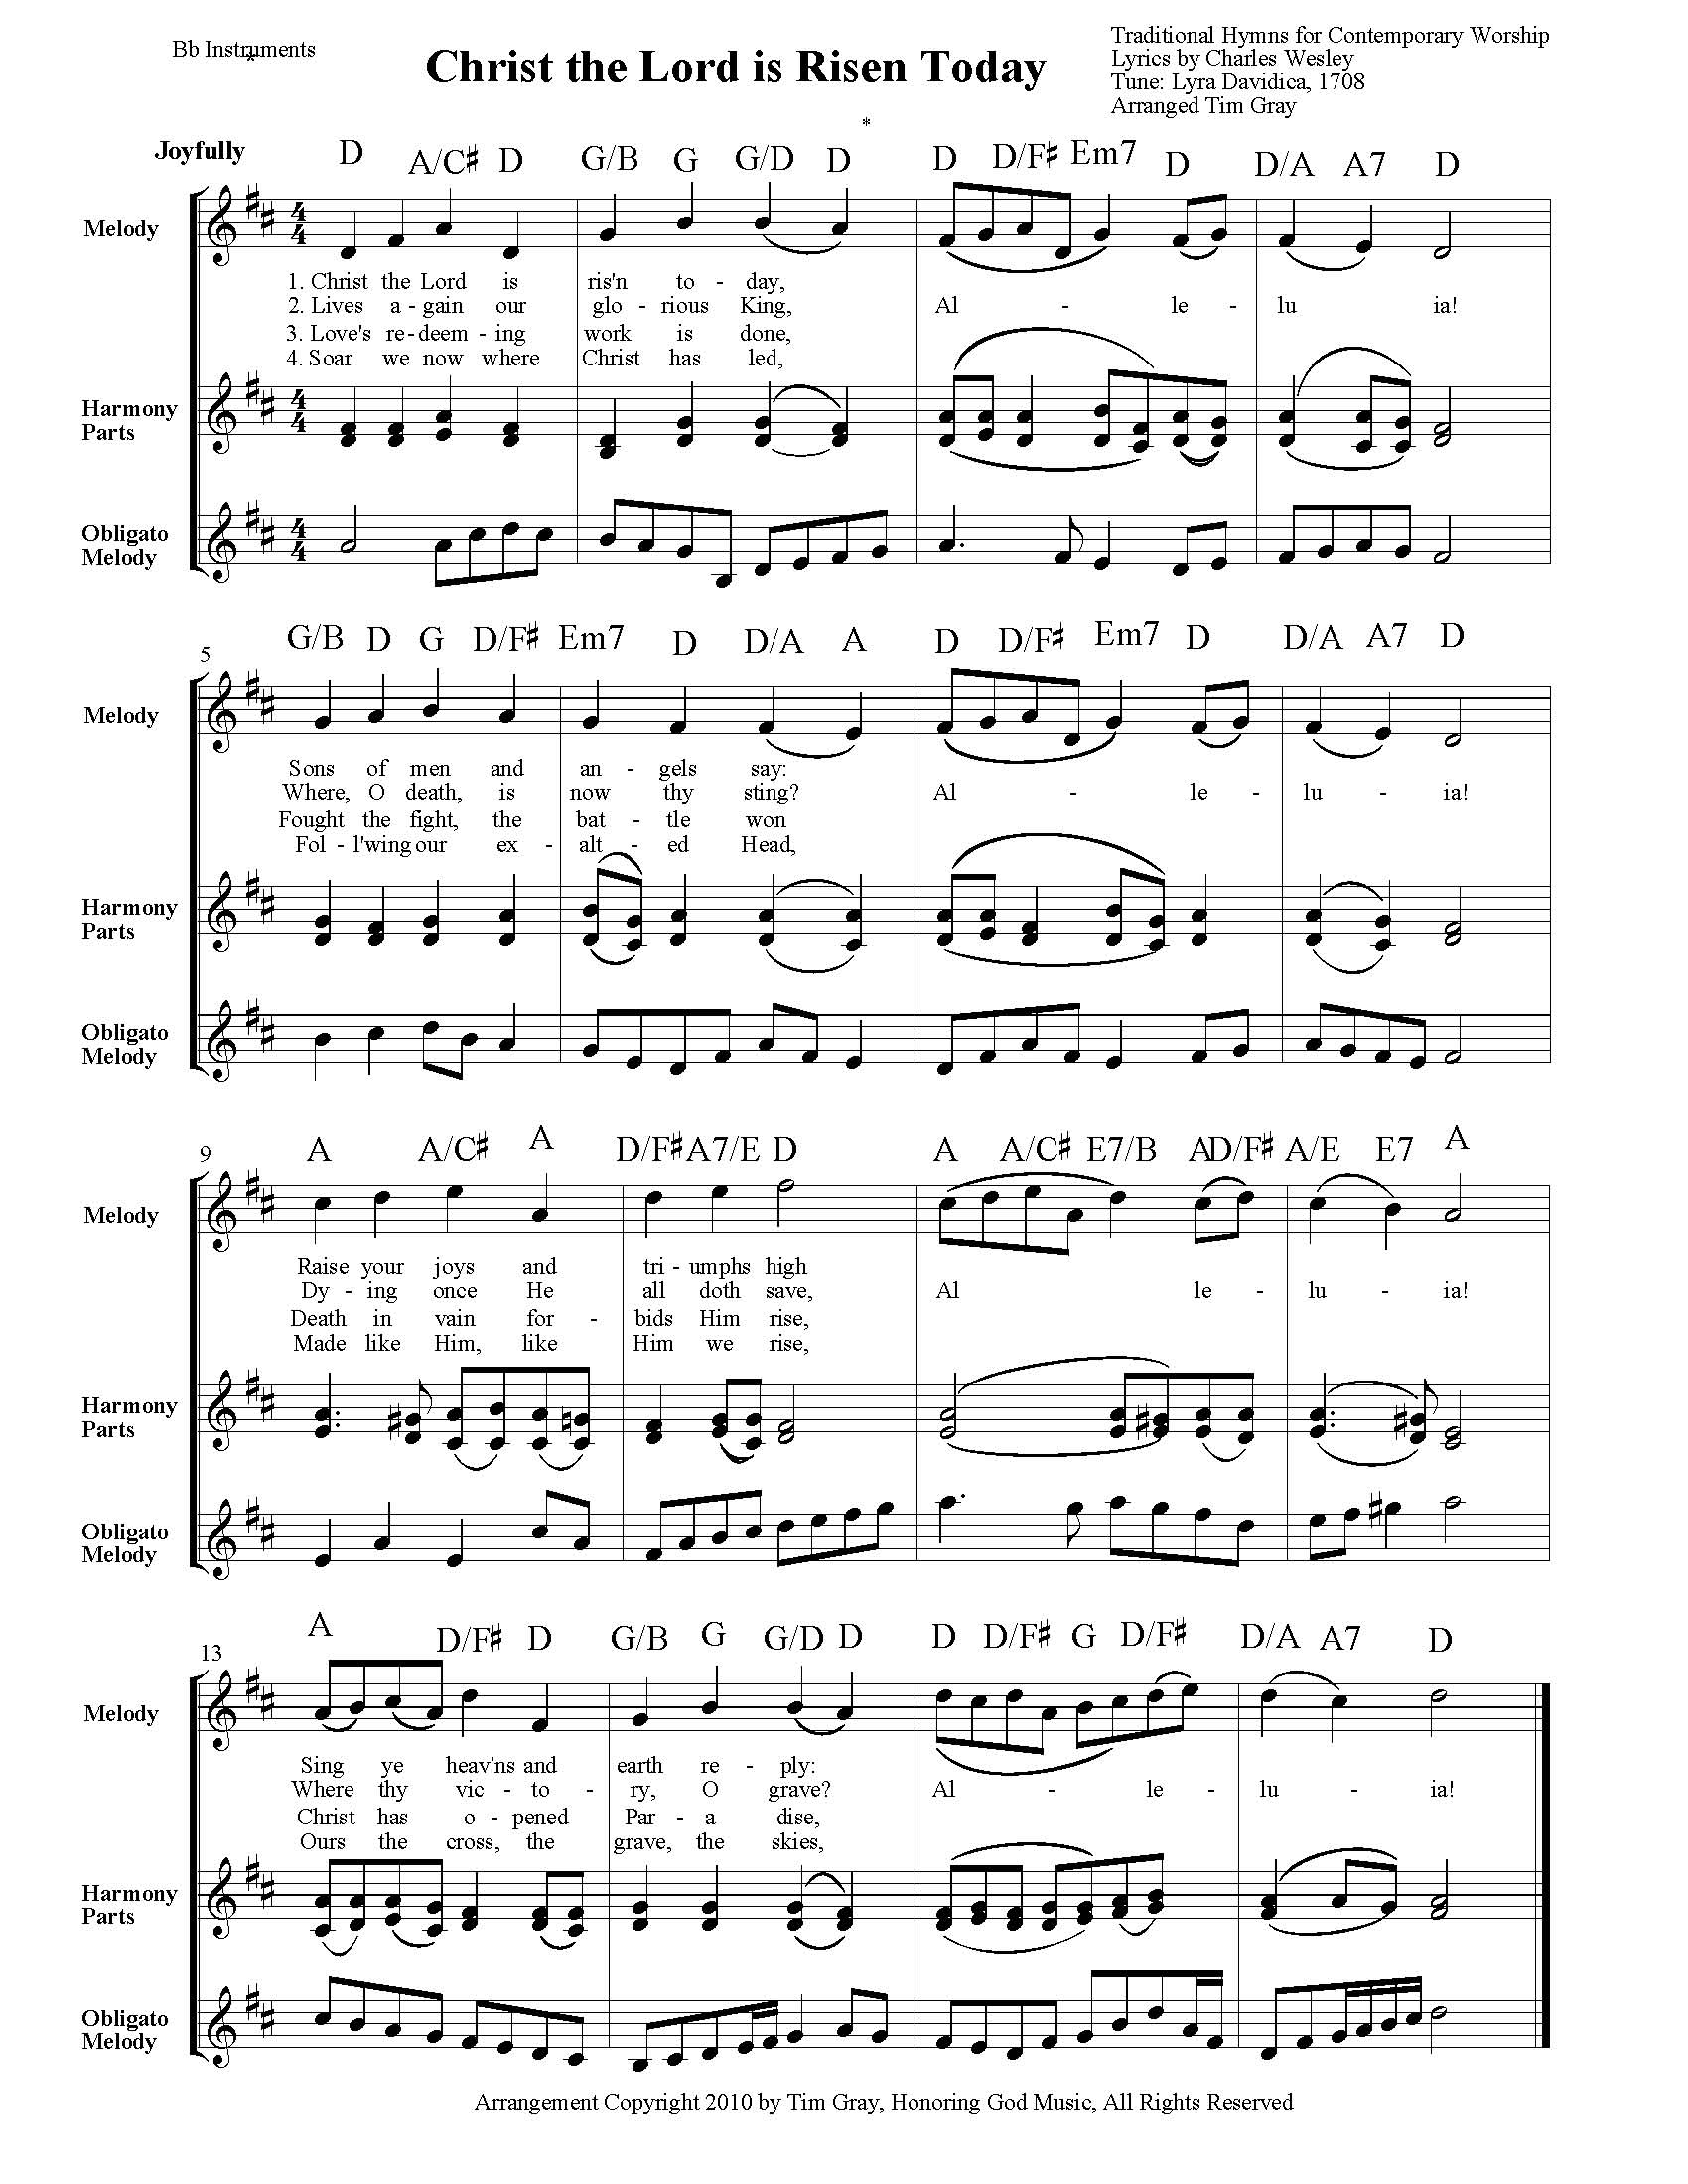 Christ the Lord is Risen Today TH4CW Traditional Hymns for Contemporary Worship sample page on HonoringGodMusic.com